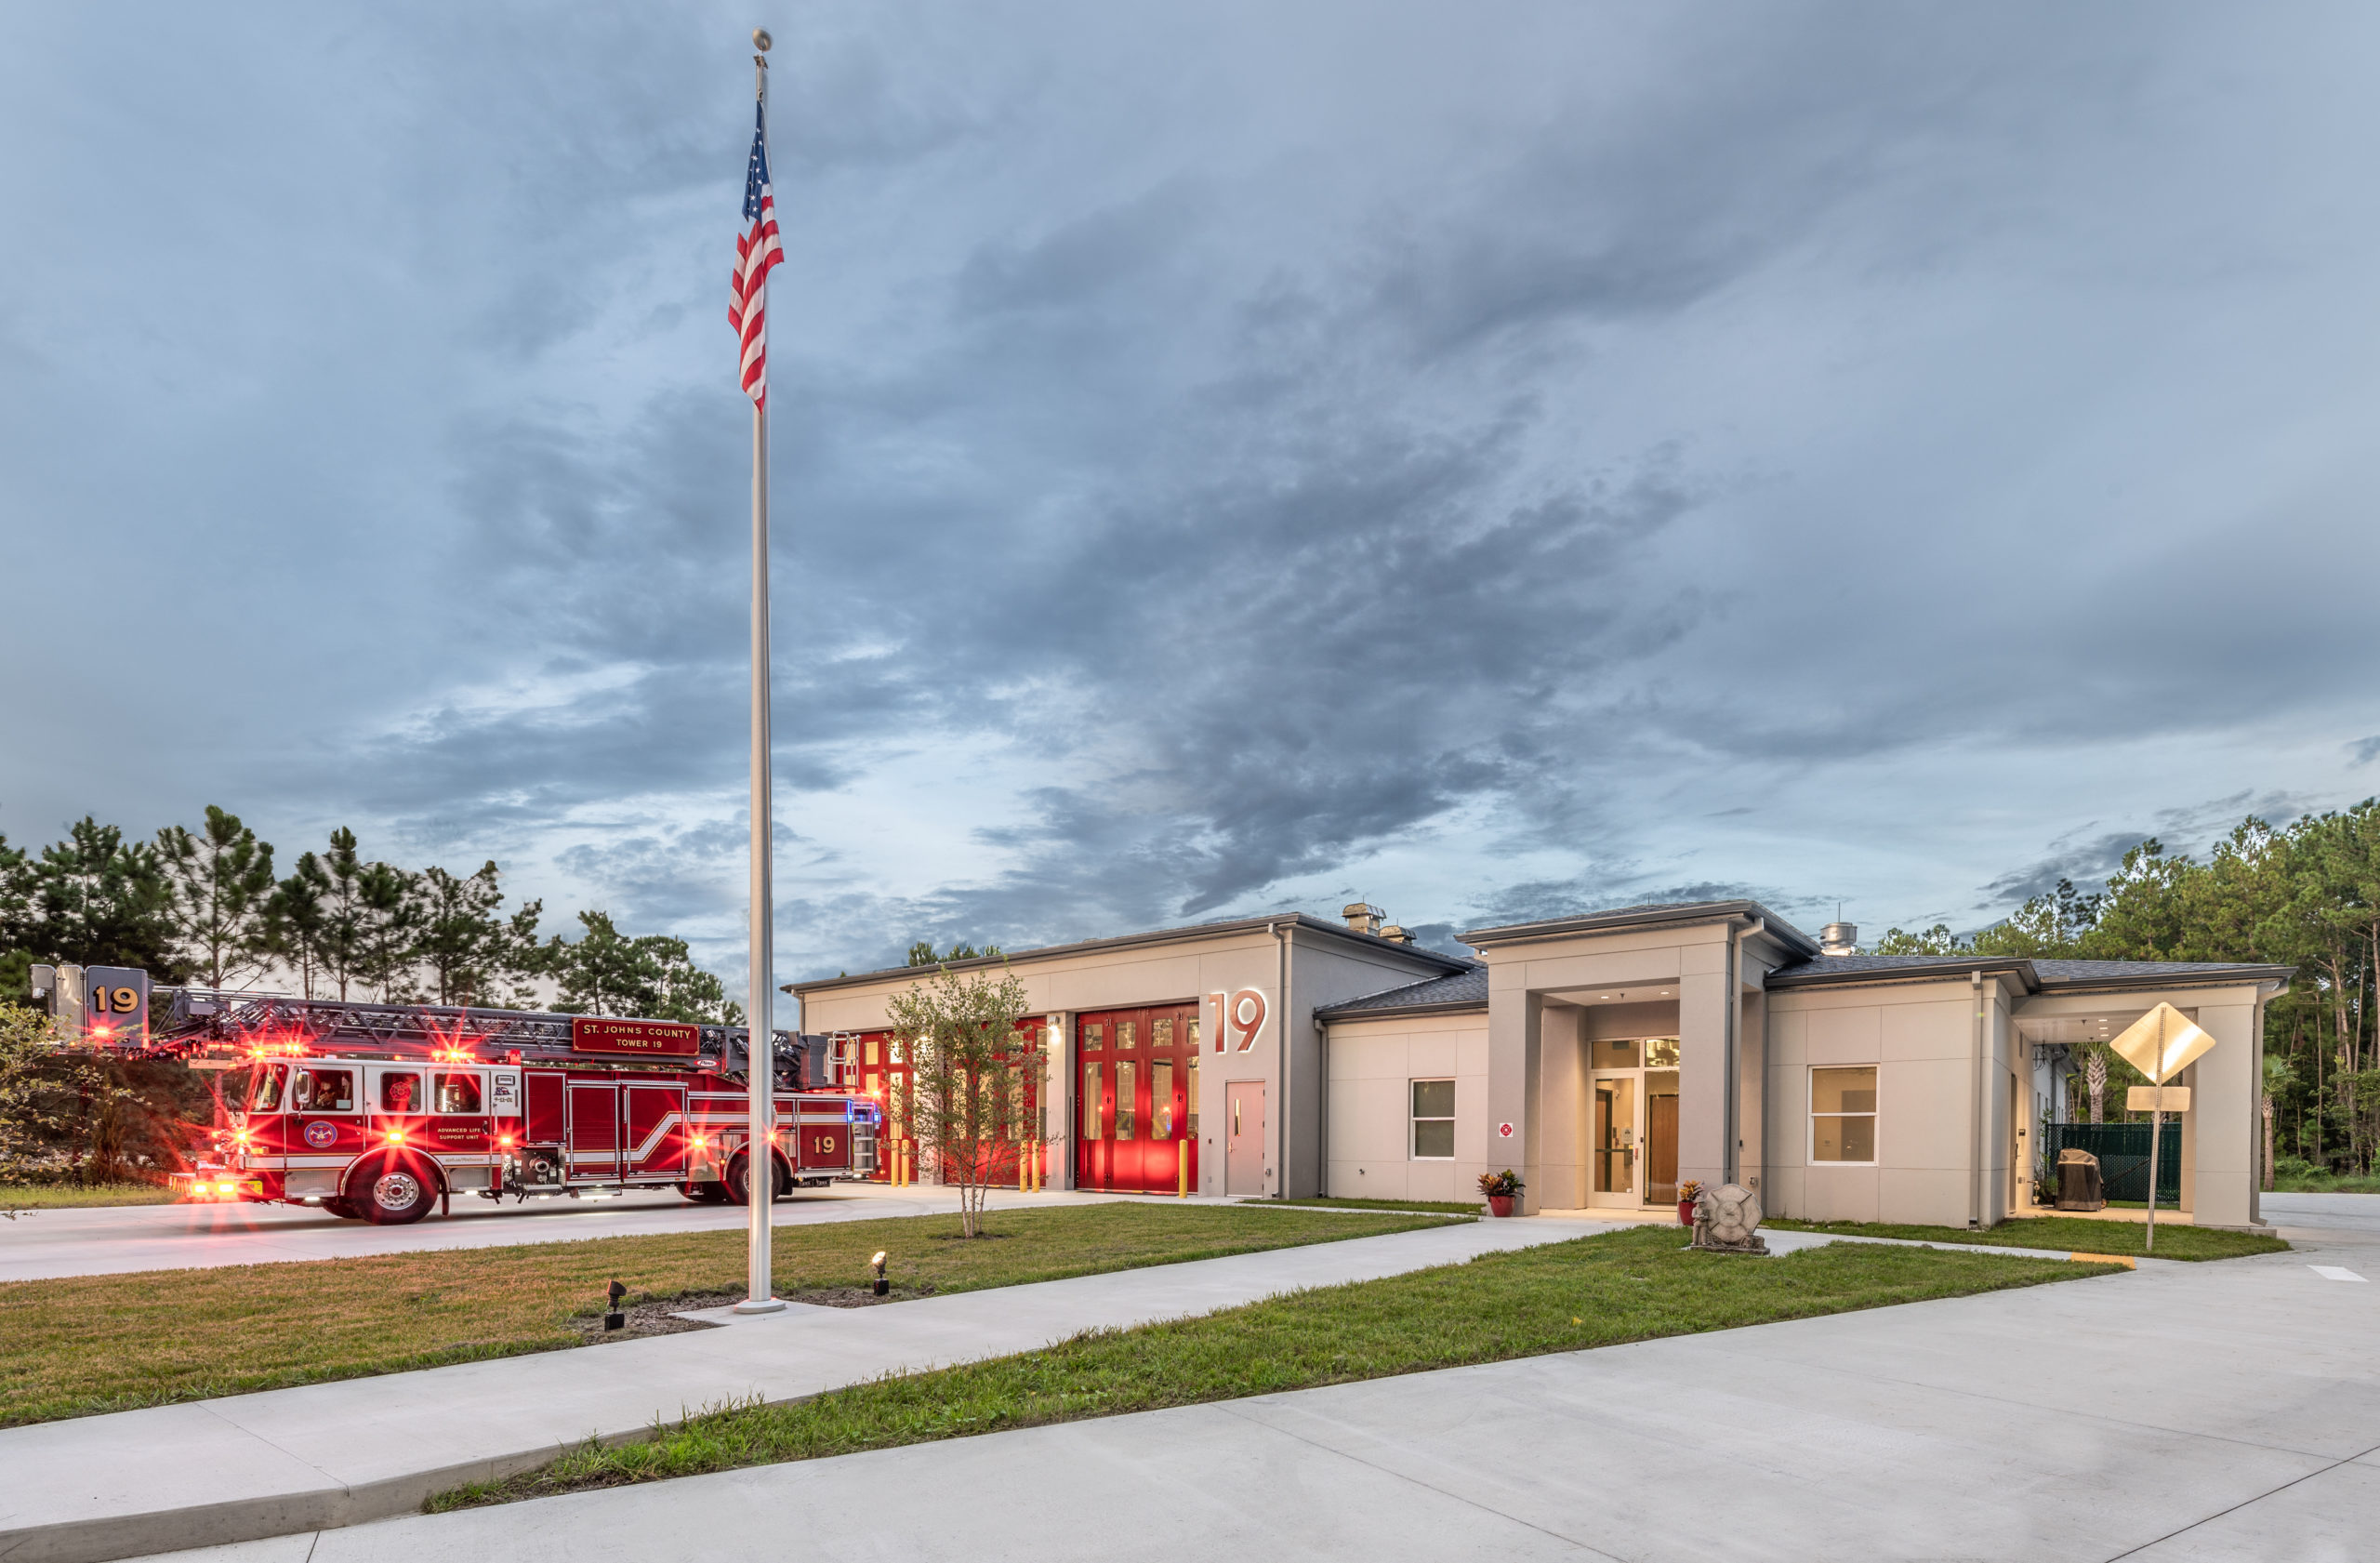 St. Johns County Fire Station No. 19